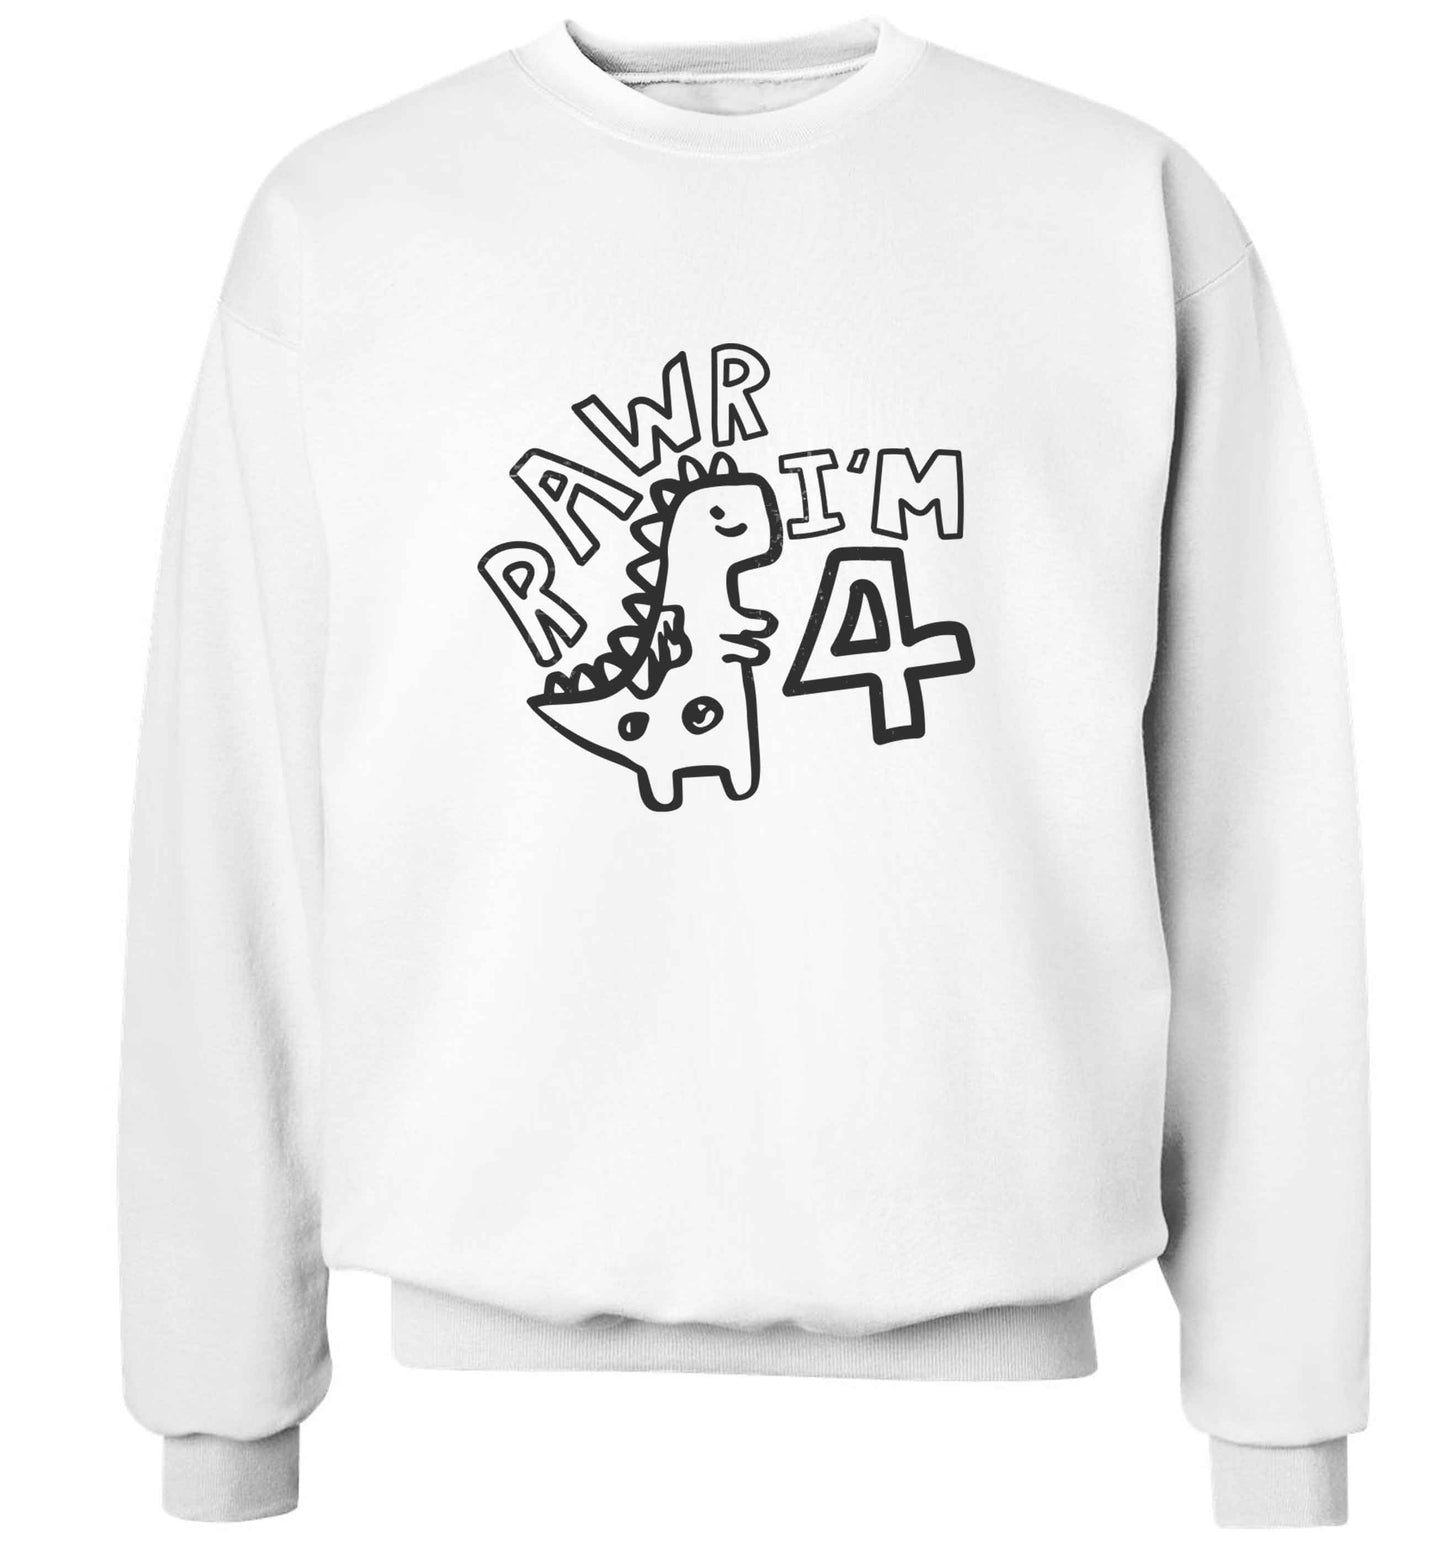 Rawr I'm four - personalise with ANY age! adult's unisex white sweater 2XL